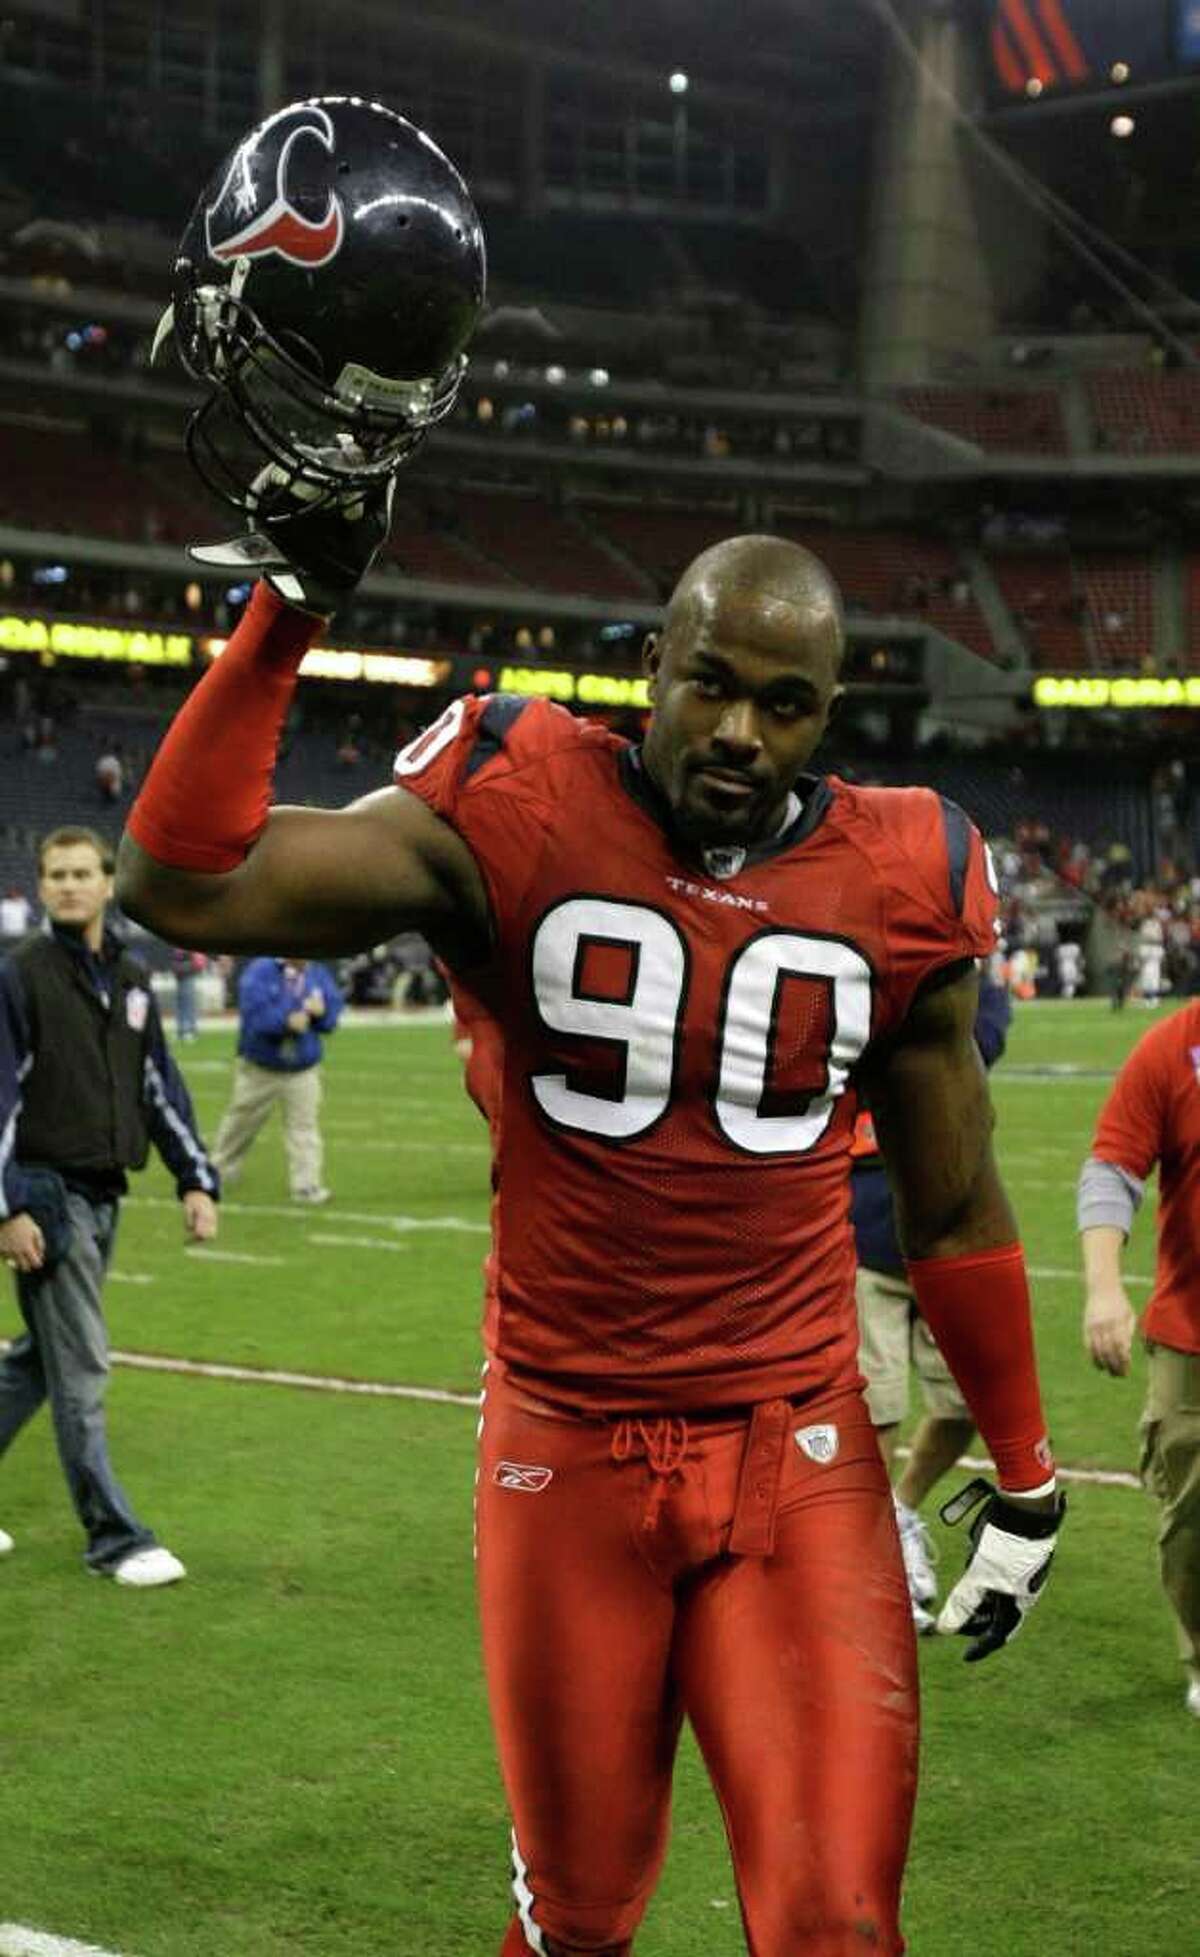 Houston Texans defensive end Mario Williams (90) raises his helmet to the crowd as he walks off the field after the Texans beat the Denver Broncos in an NFL football game at Reliant Stadium Thursday, Dec. 13, 2007, in Houston. The Texans defeated the Broncos 31-13. ( Brett Coomer / Chronicle )